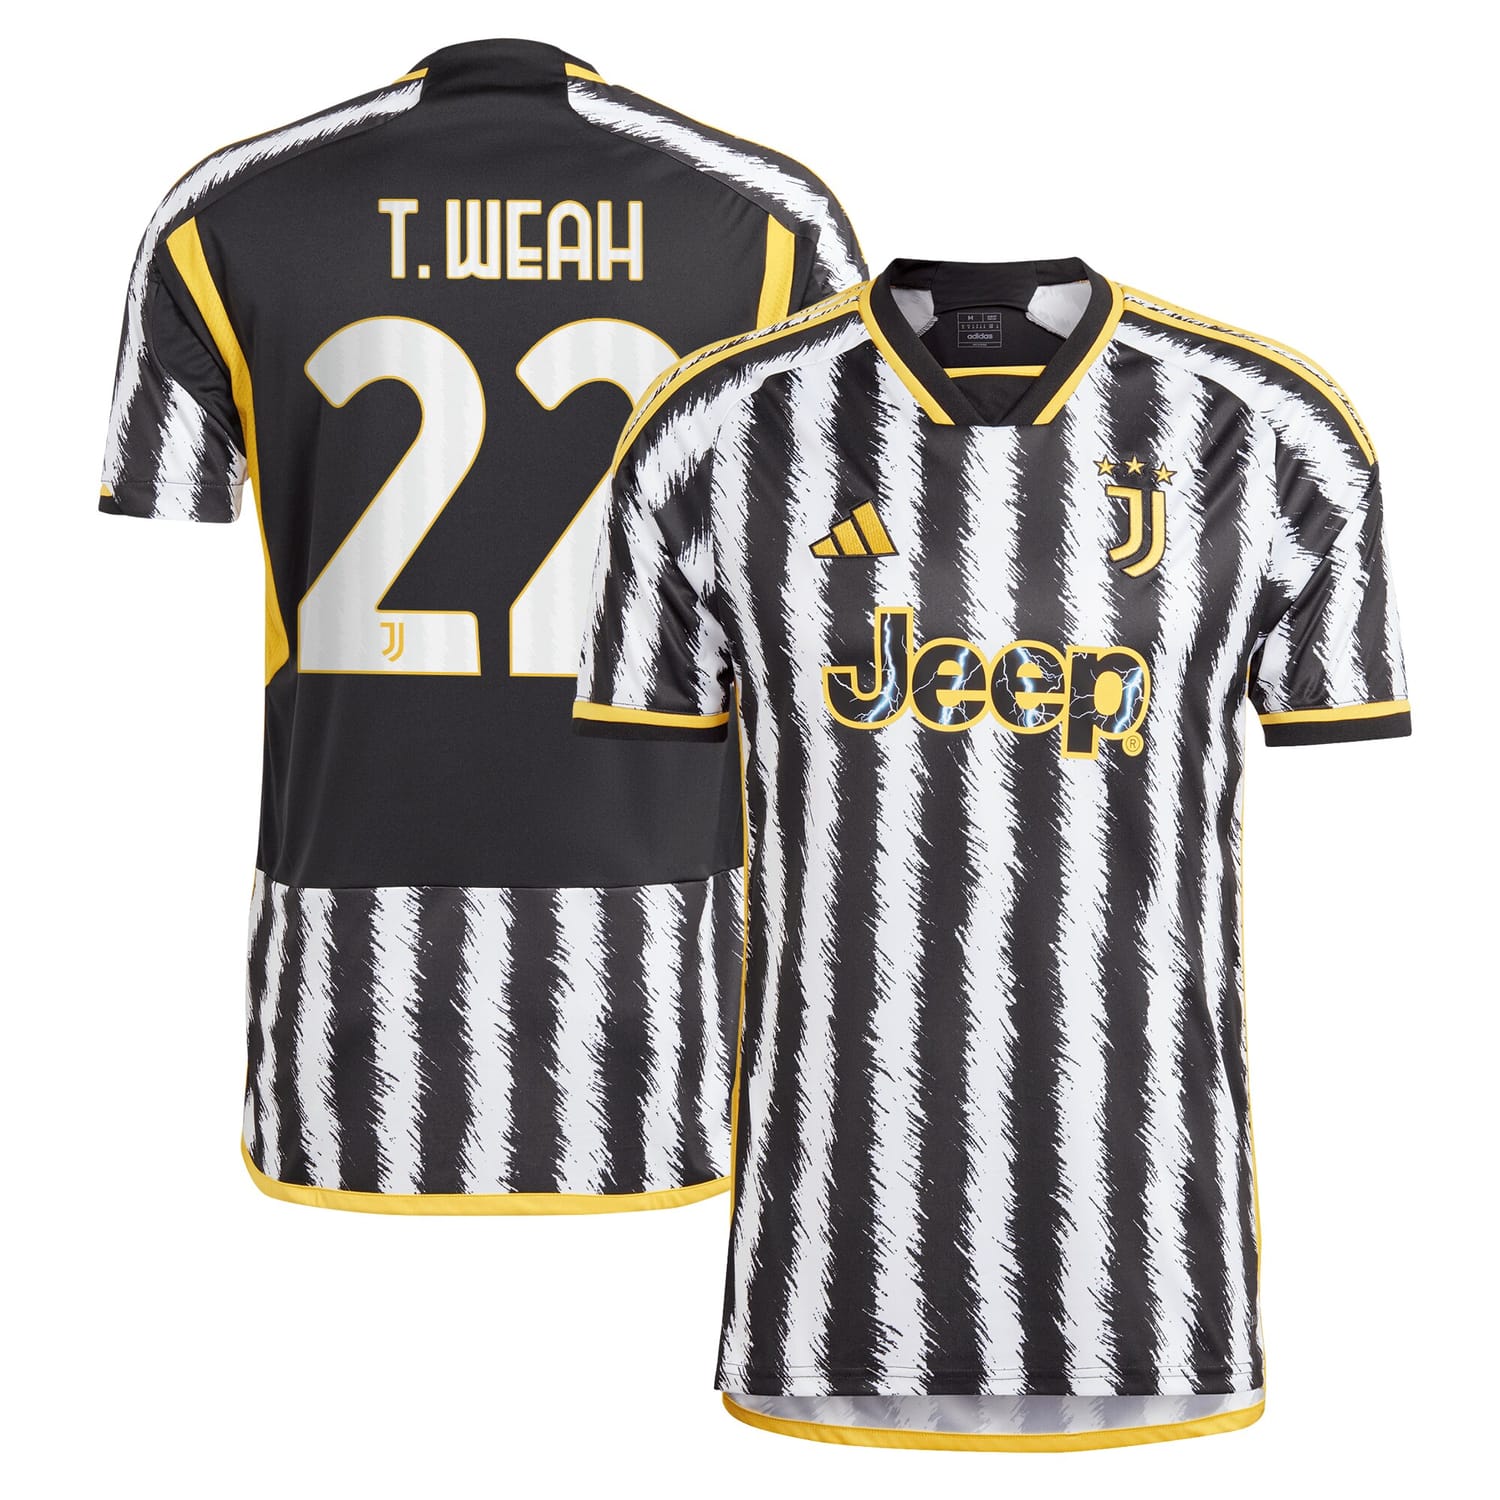 Serie A Juventus Home Jersey Shirt Black 2023-24 player Timothy Weah printing for Men